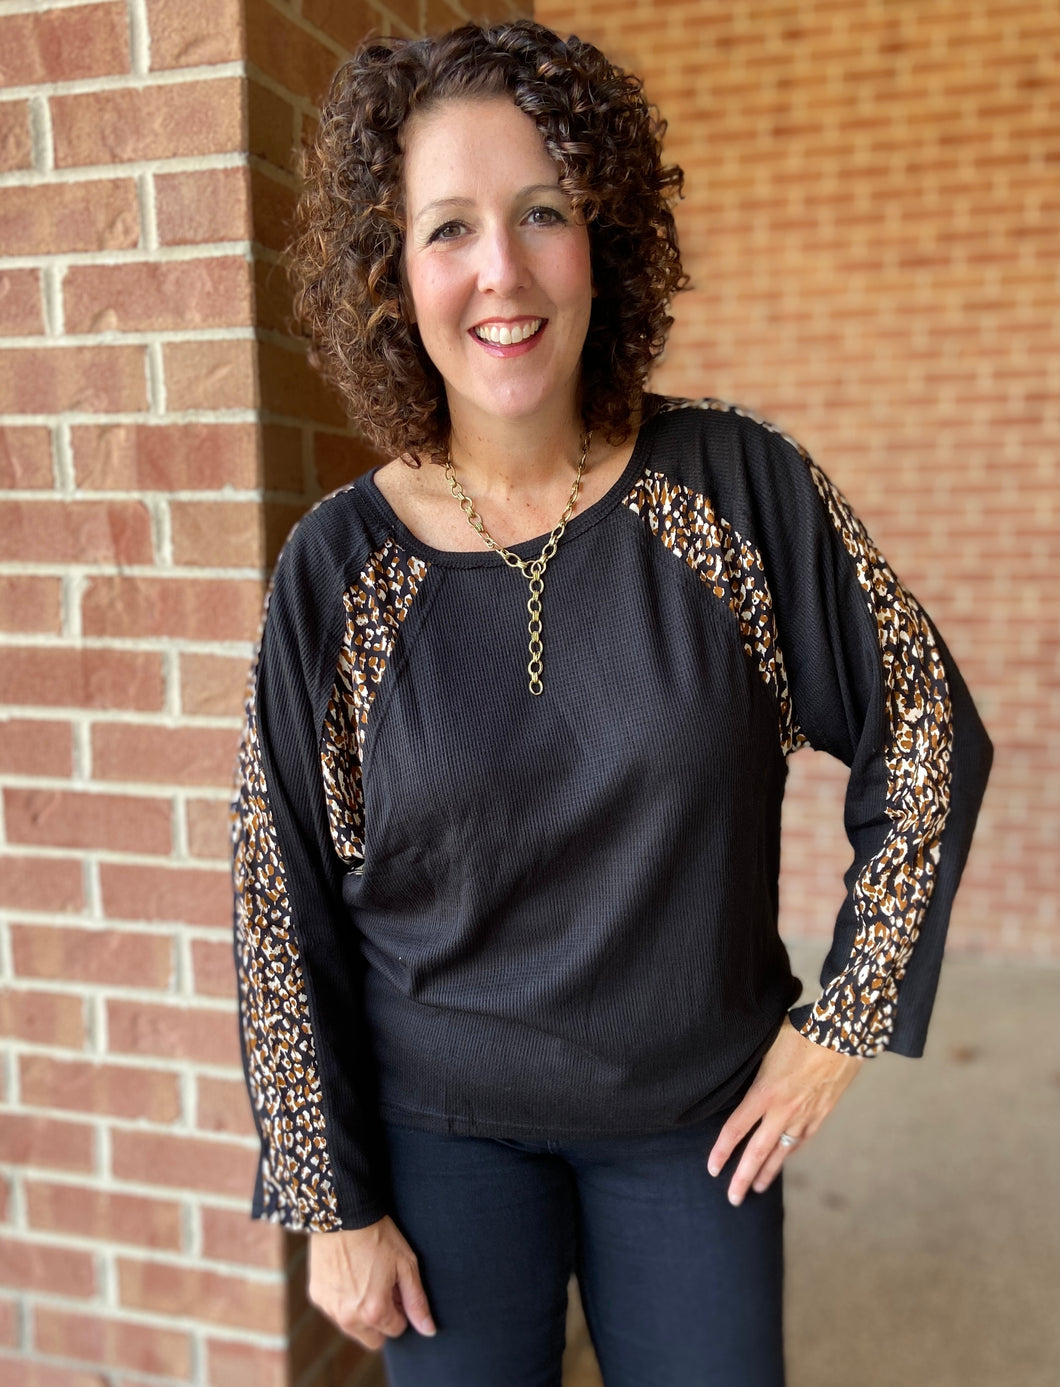 Dolman Waffle Knit Top with Animal Accents - BLACK